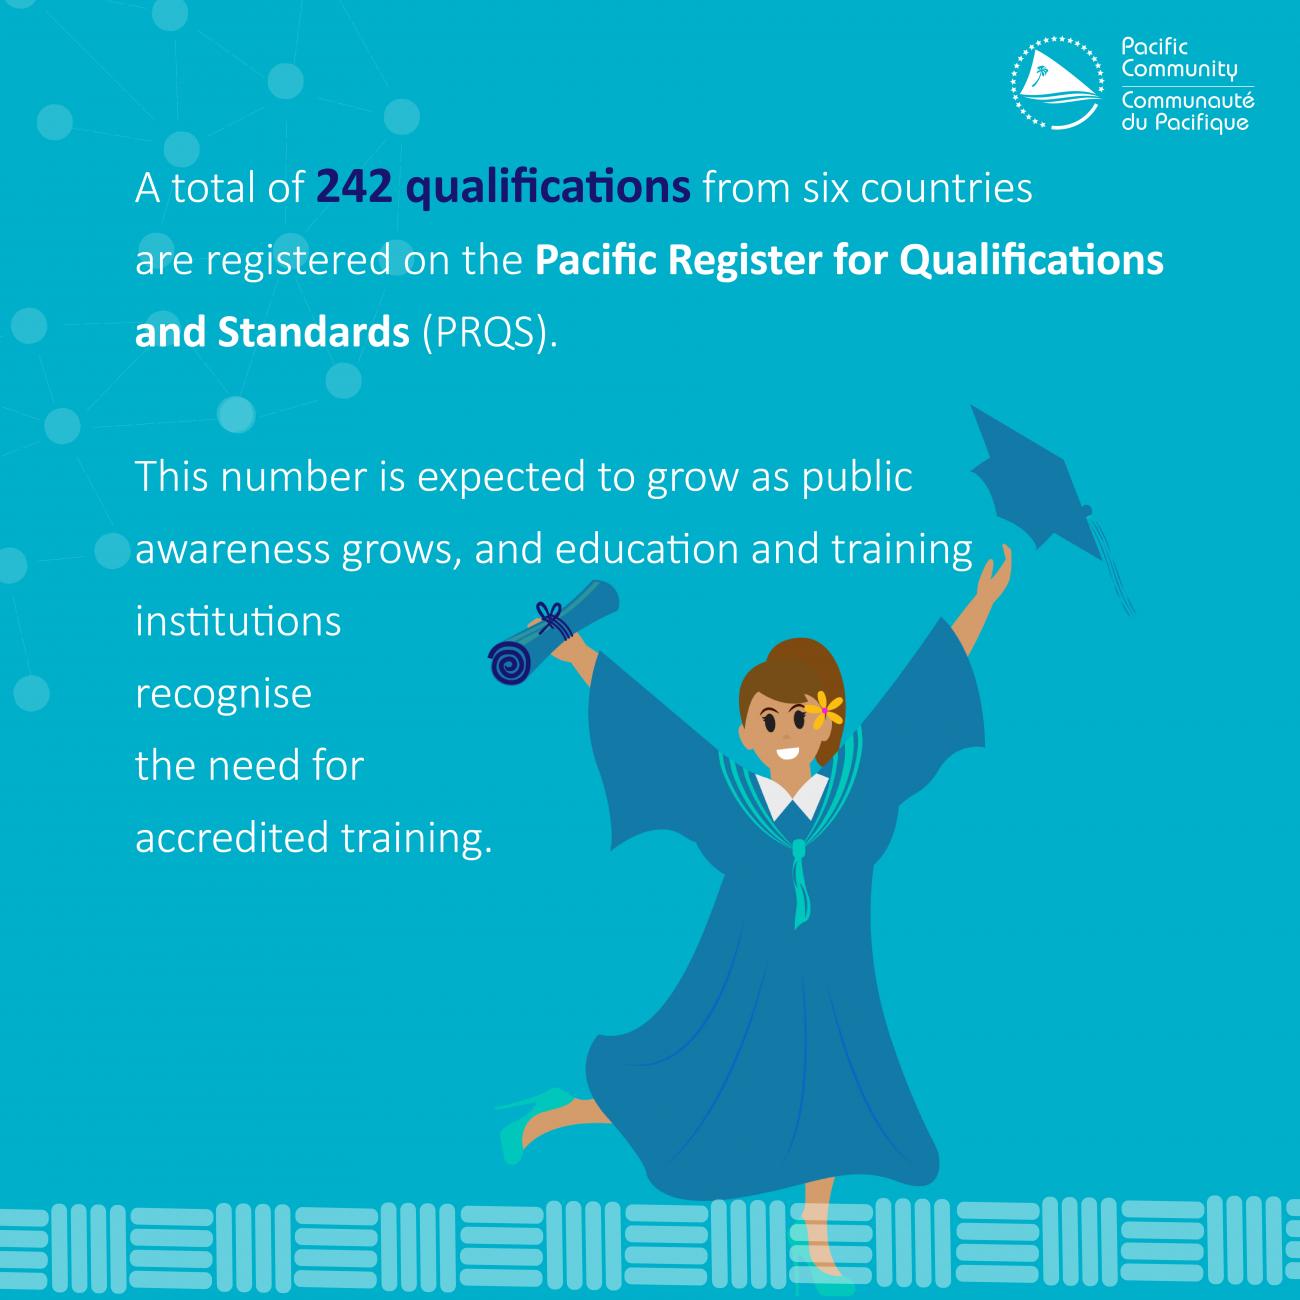 A total of 242 qualifications listed on PRQS